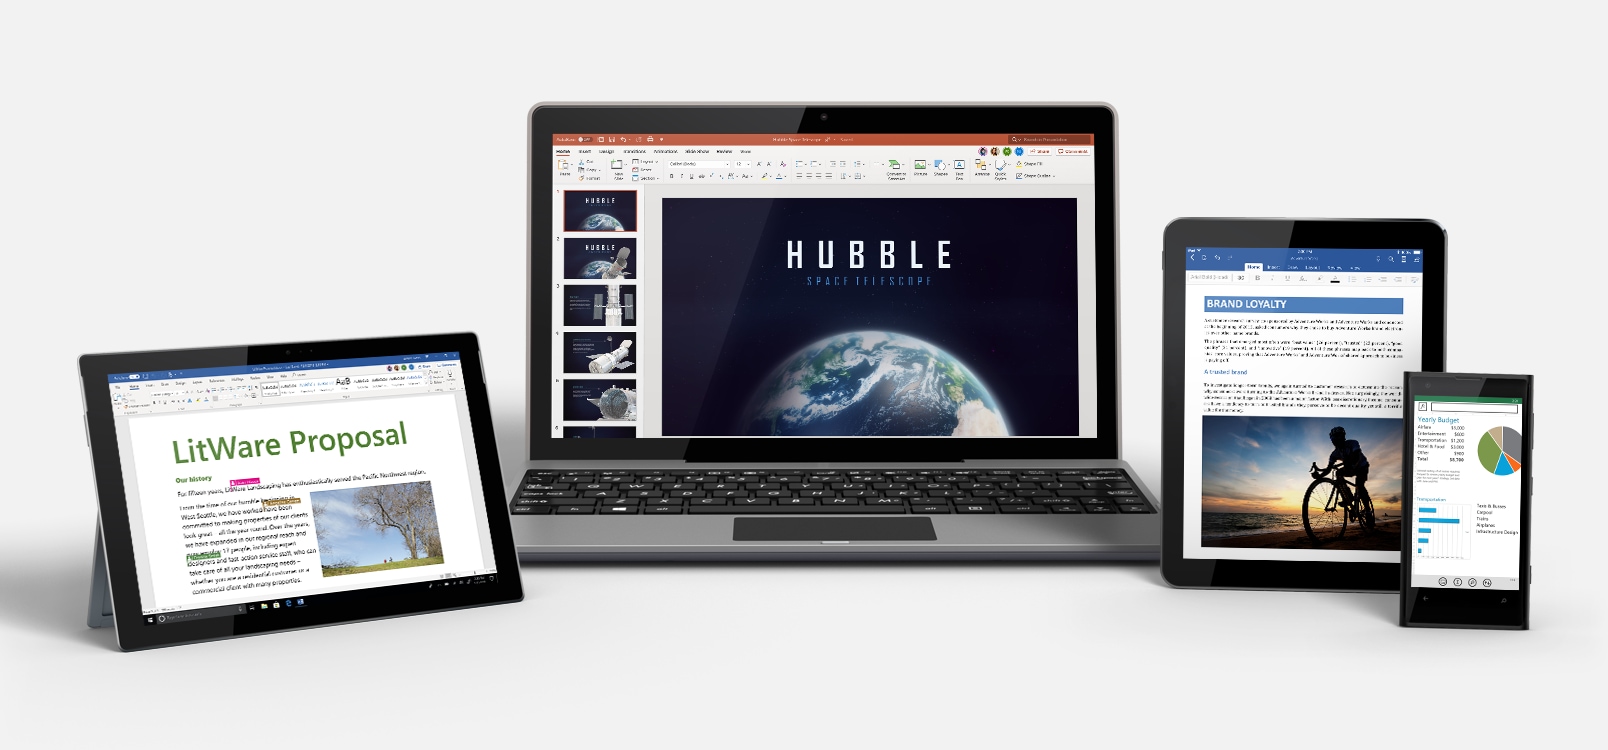 A Windows tablet, a laptop, an iPad, and a smartphone showing Office 365 in use.